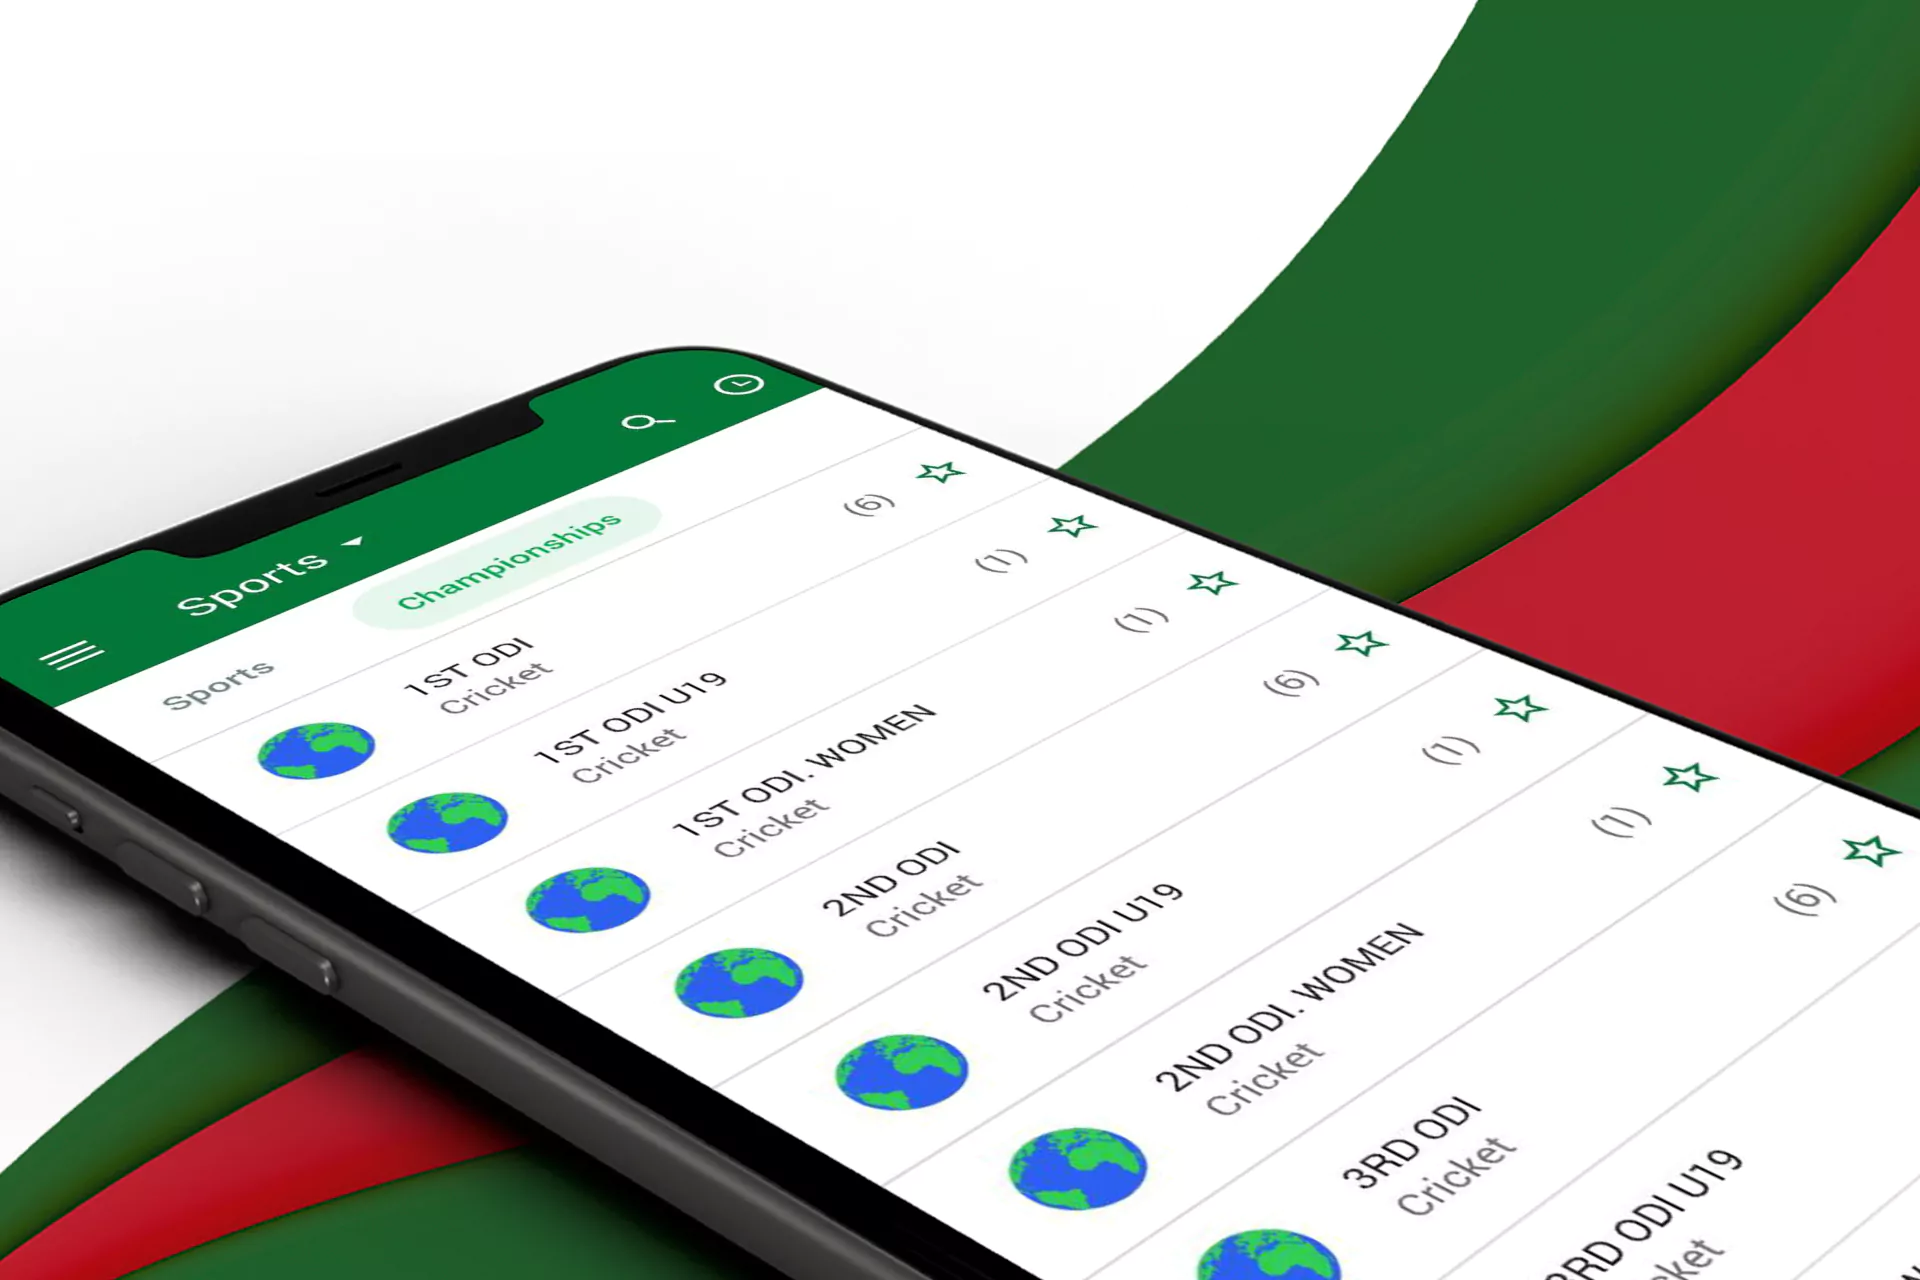 Also we developed the app for betting and playing casino.